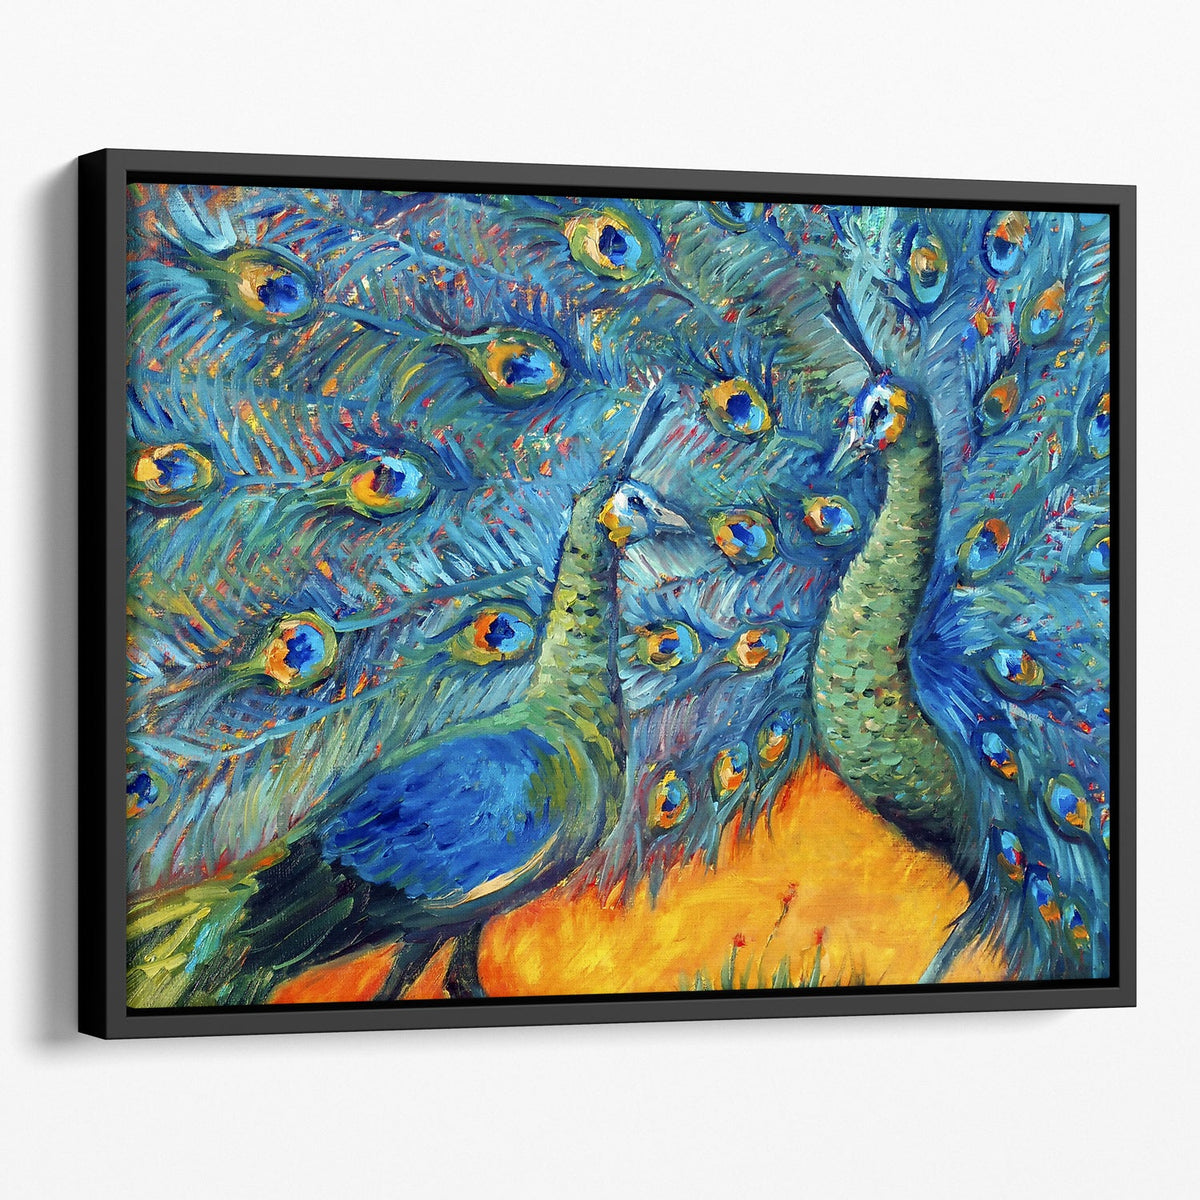 The Two Peacocks Canvas Sets